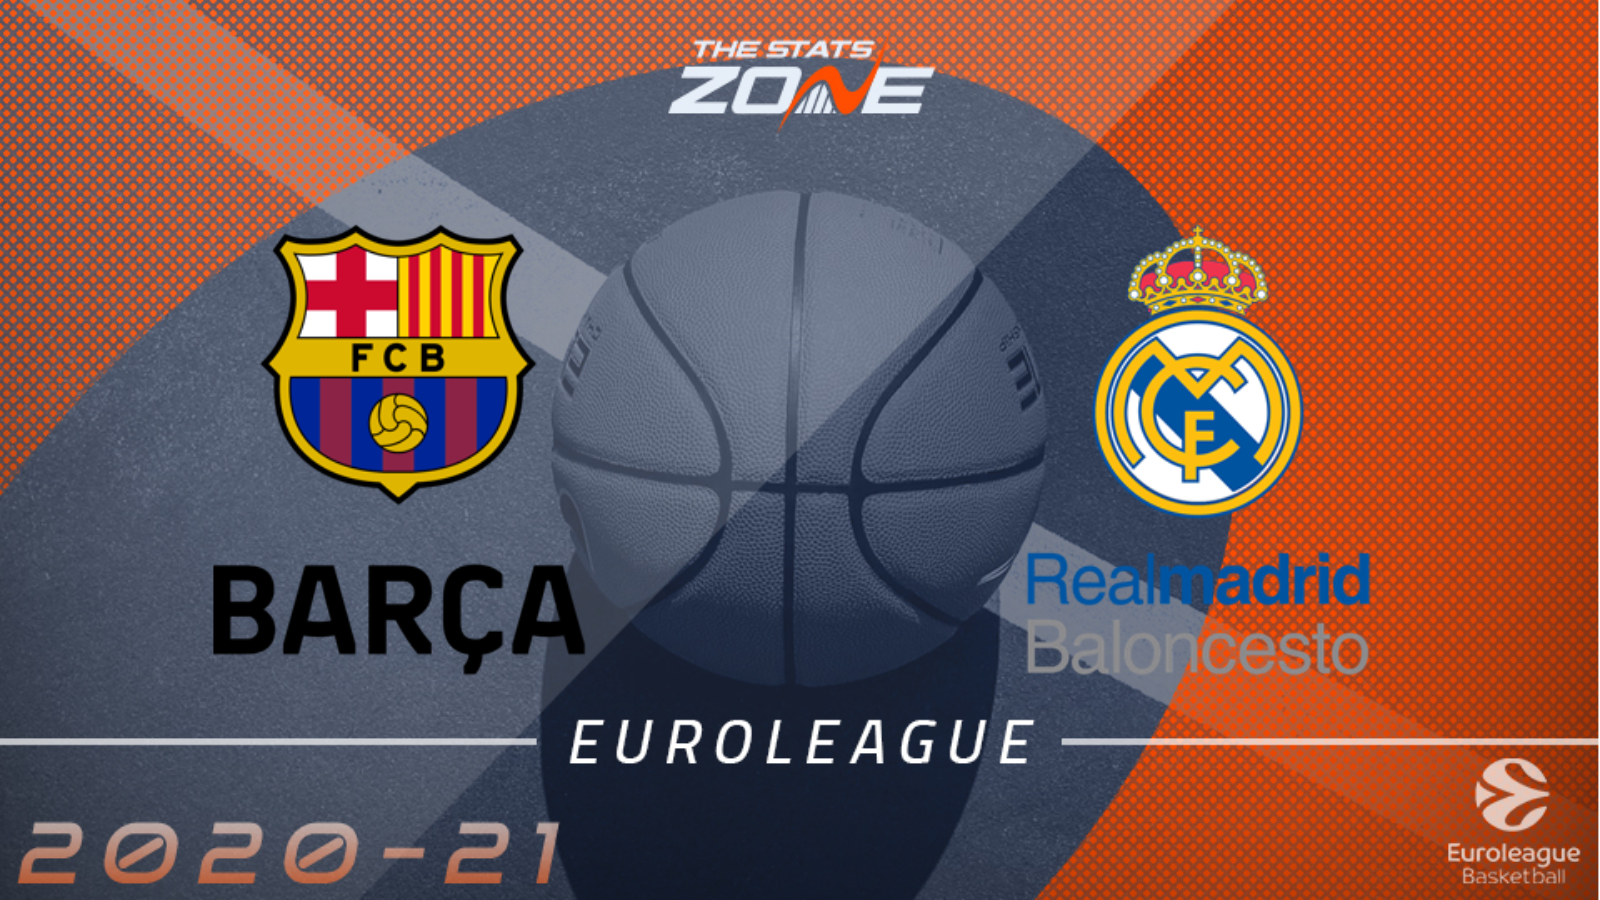 2020 21 Euroleague Fc Barcelona Vs Real Madrid Preview Pick The Stats Zone